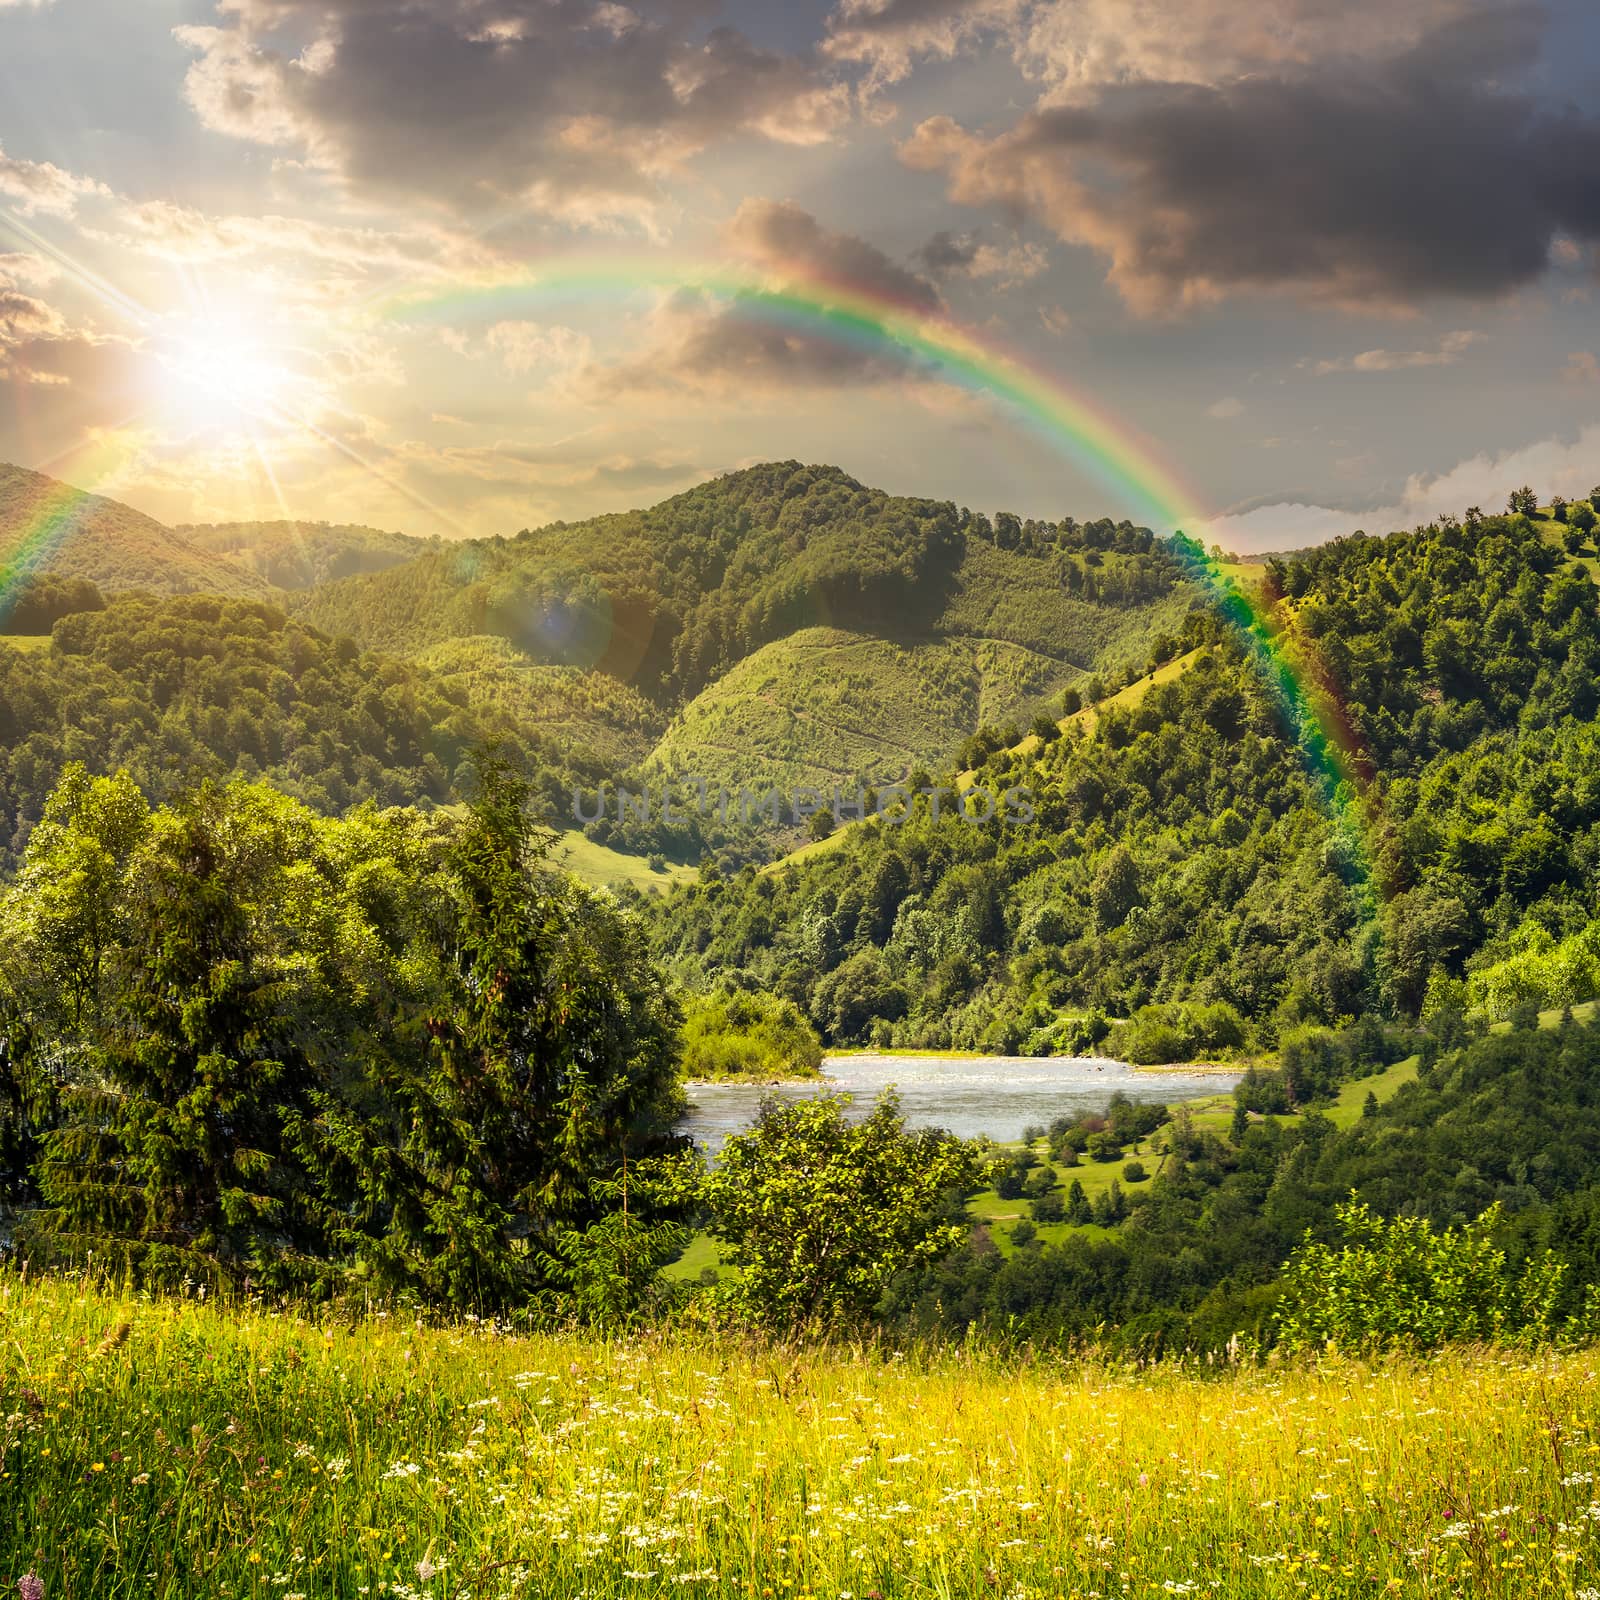 composite mountain summer landscape. pine trees on hillside meadow with wild flowers near the river in mountains in sunset light with rainbow